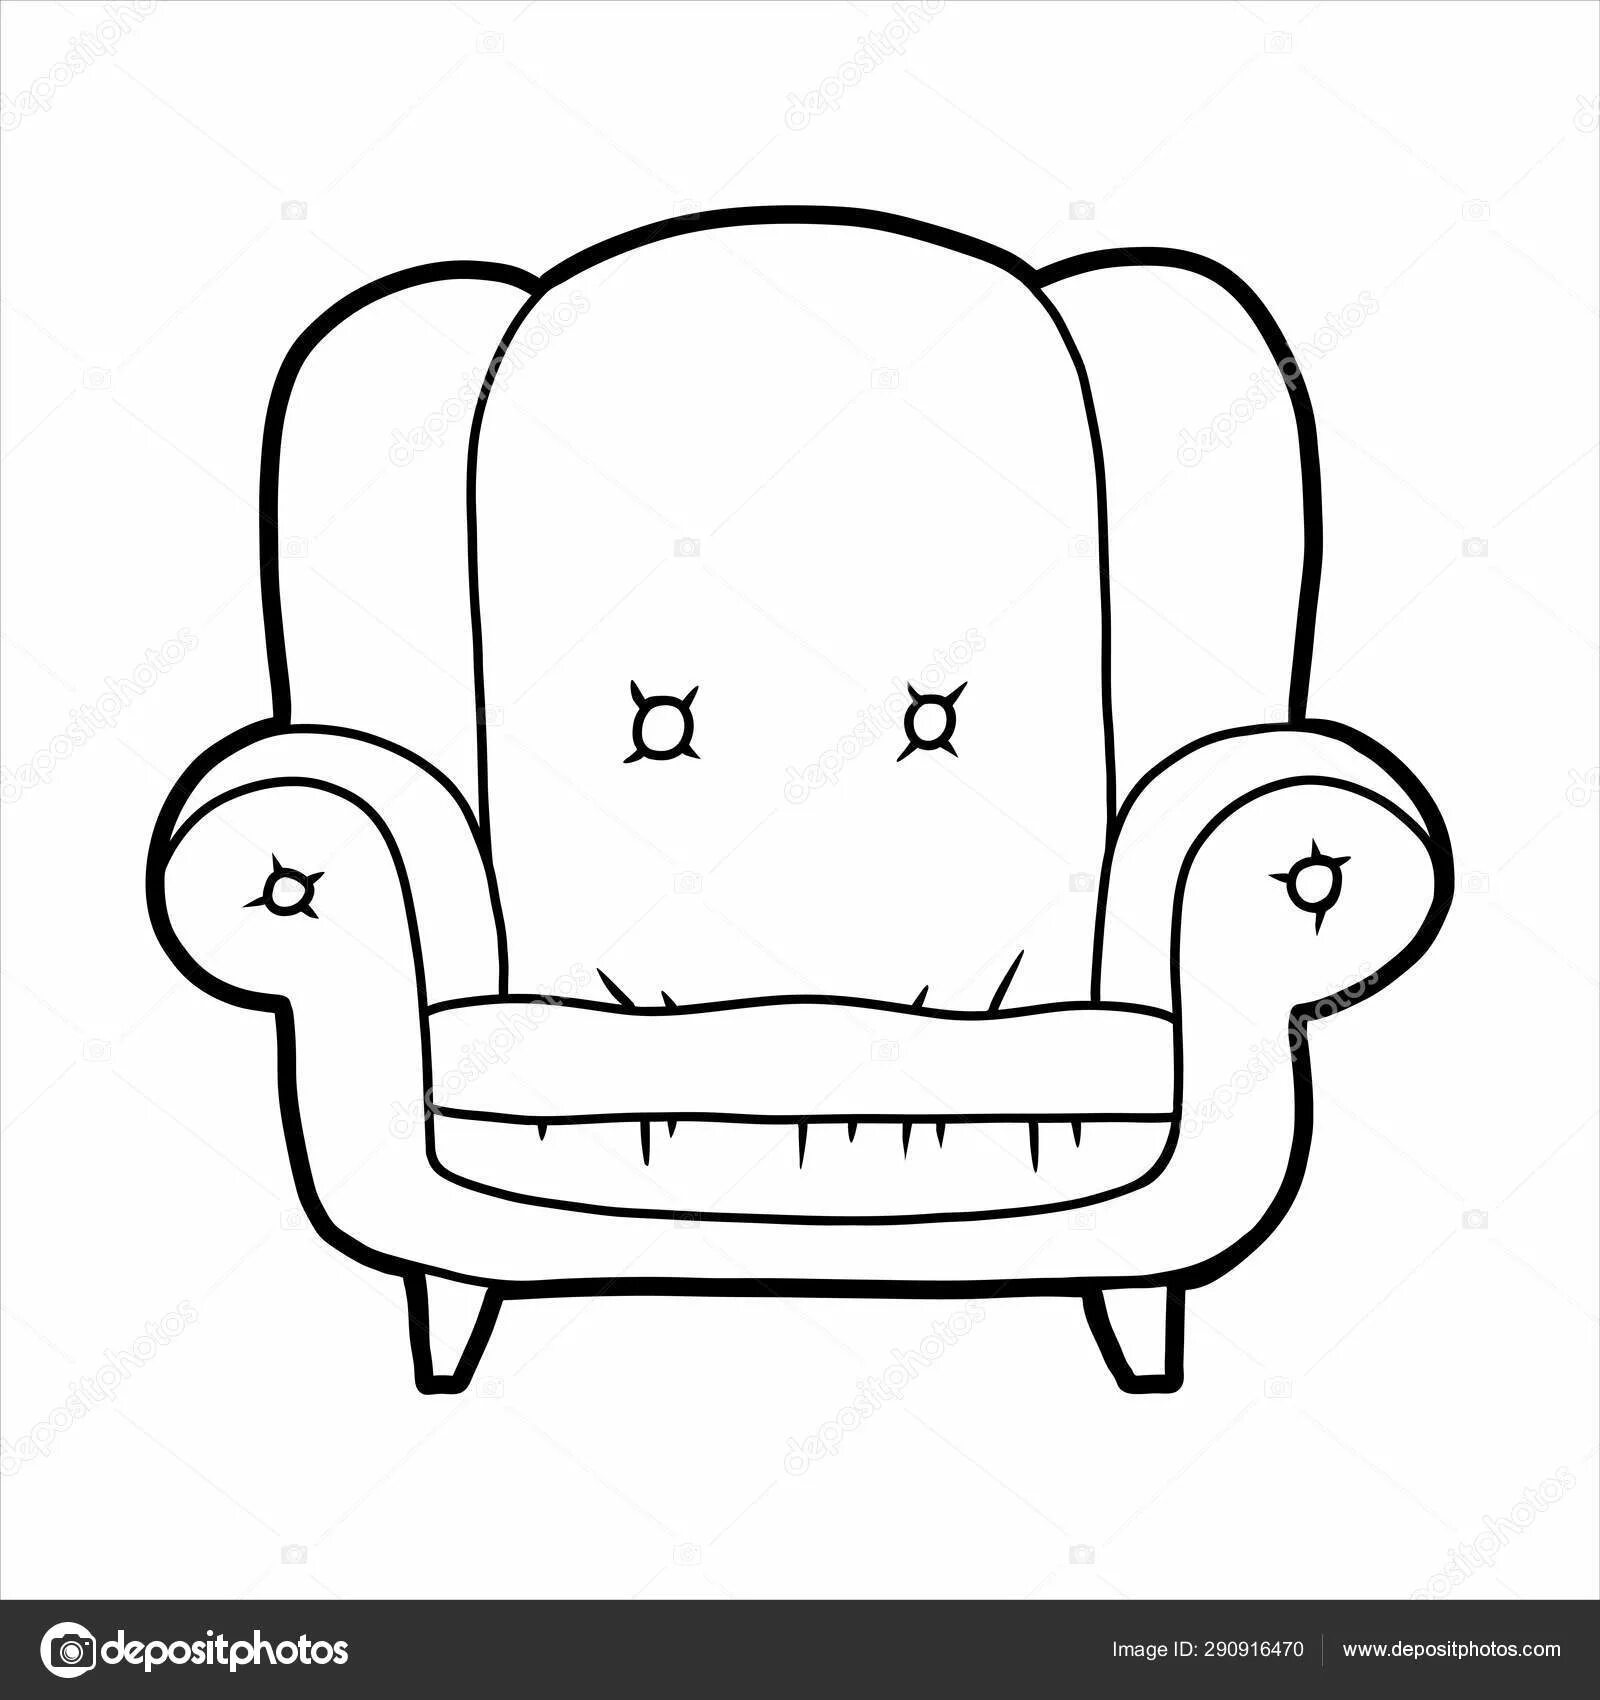 Coloring book stylish chair for children